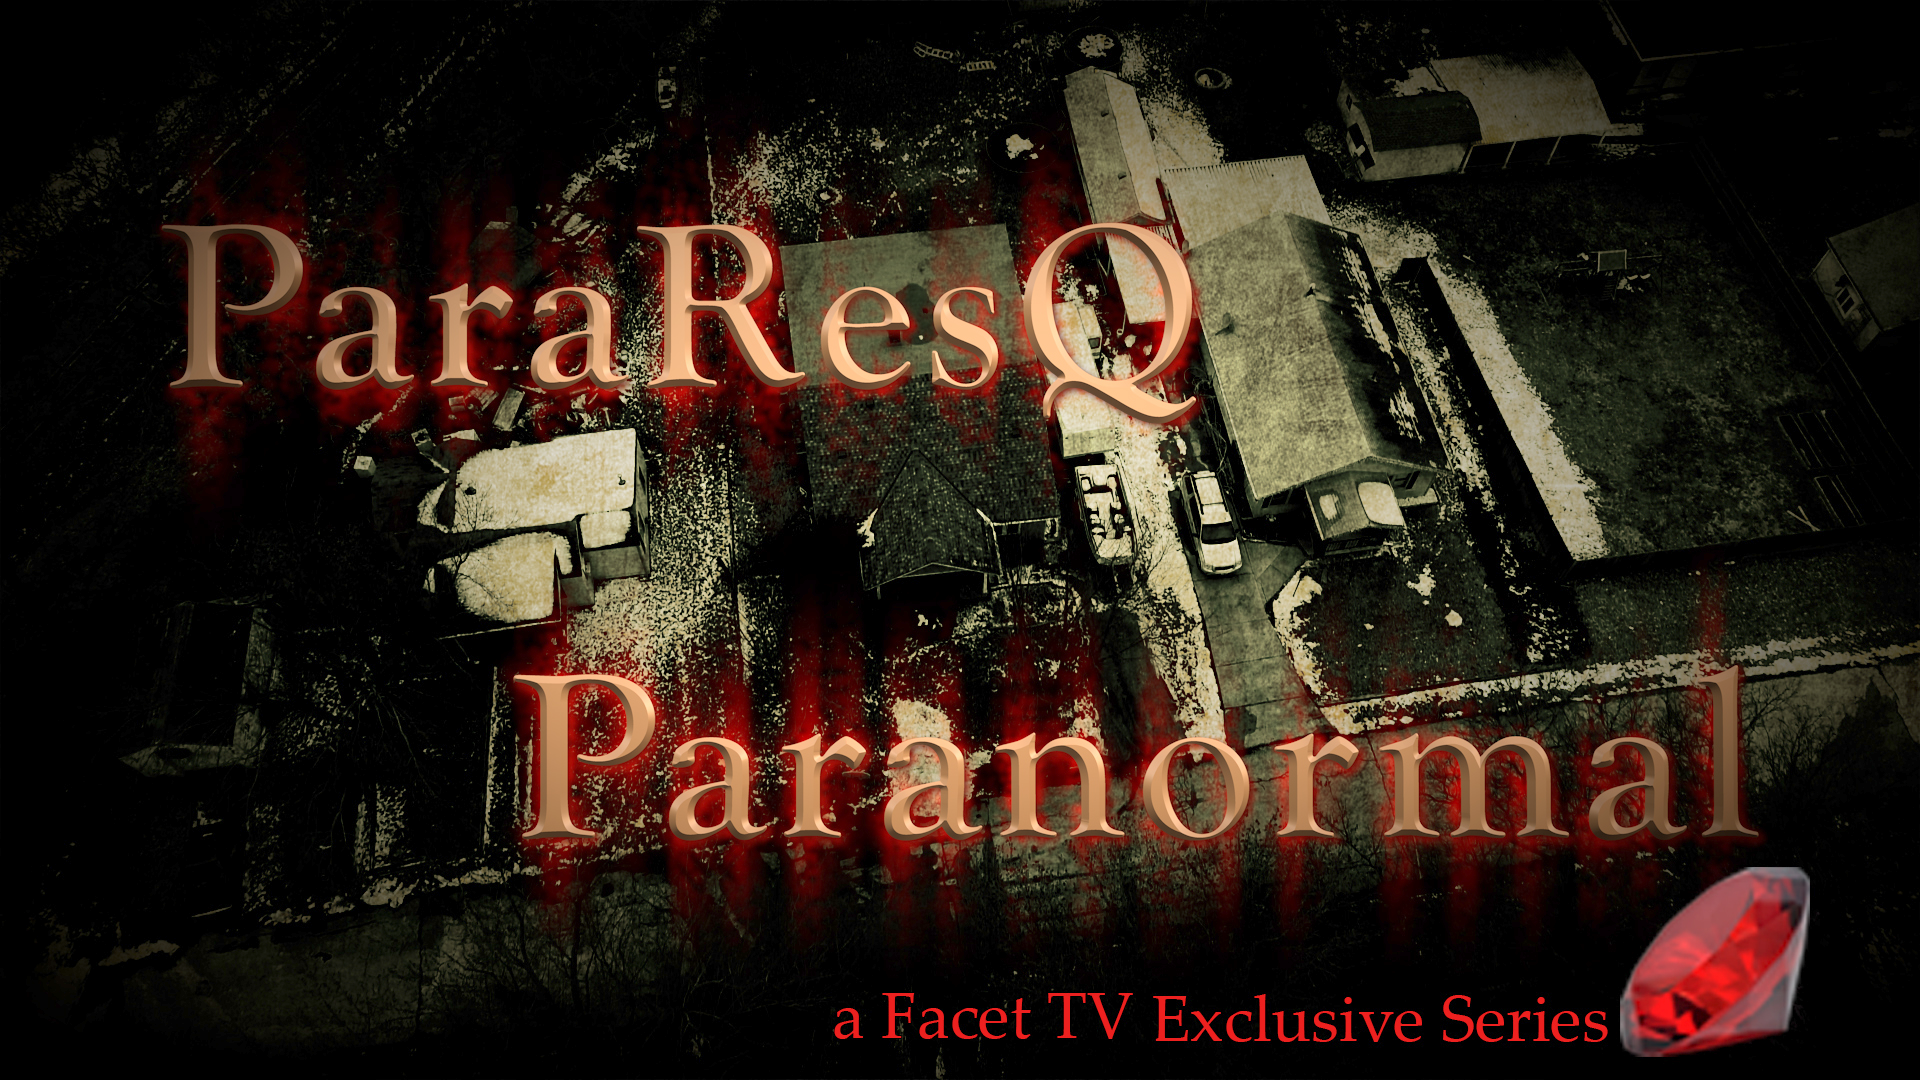 Photo for True Ghost Stories Episode One - ParaResQ on ViewStub